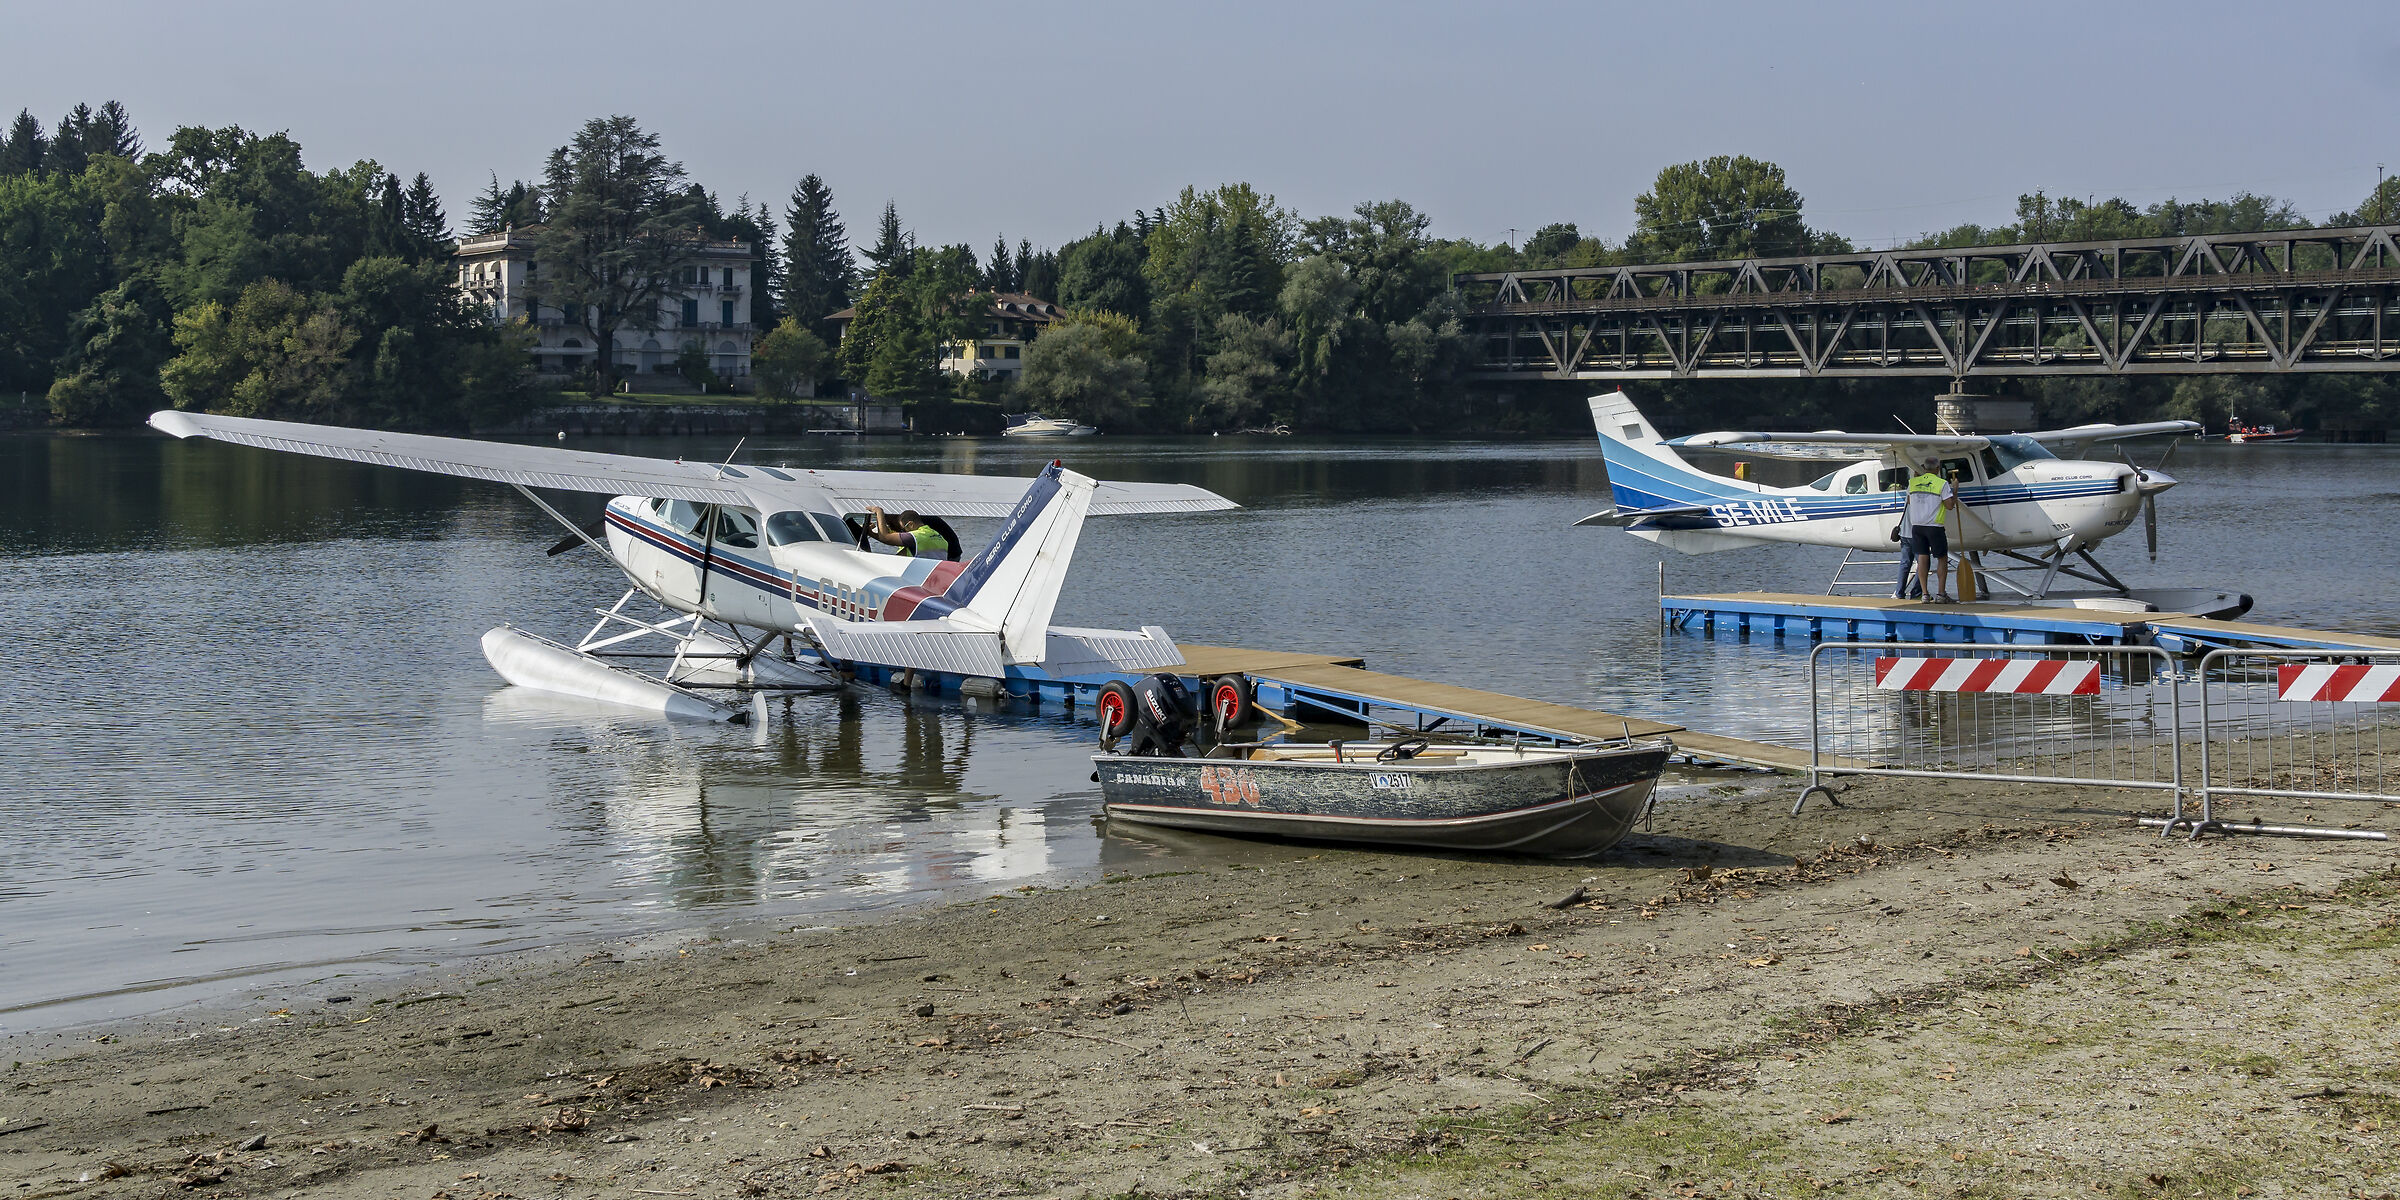 Two Cessna 172 "Skyhawk" at the piers - 1...